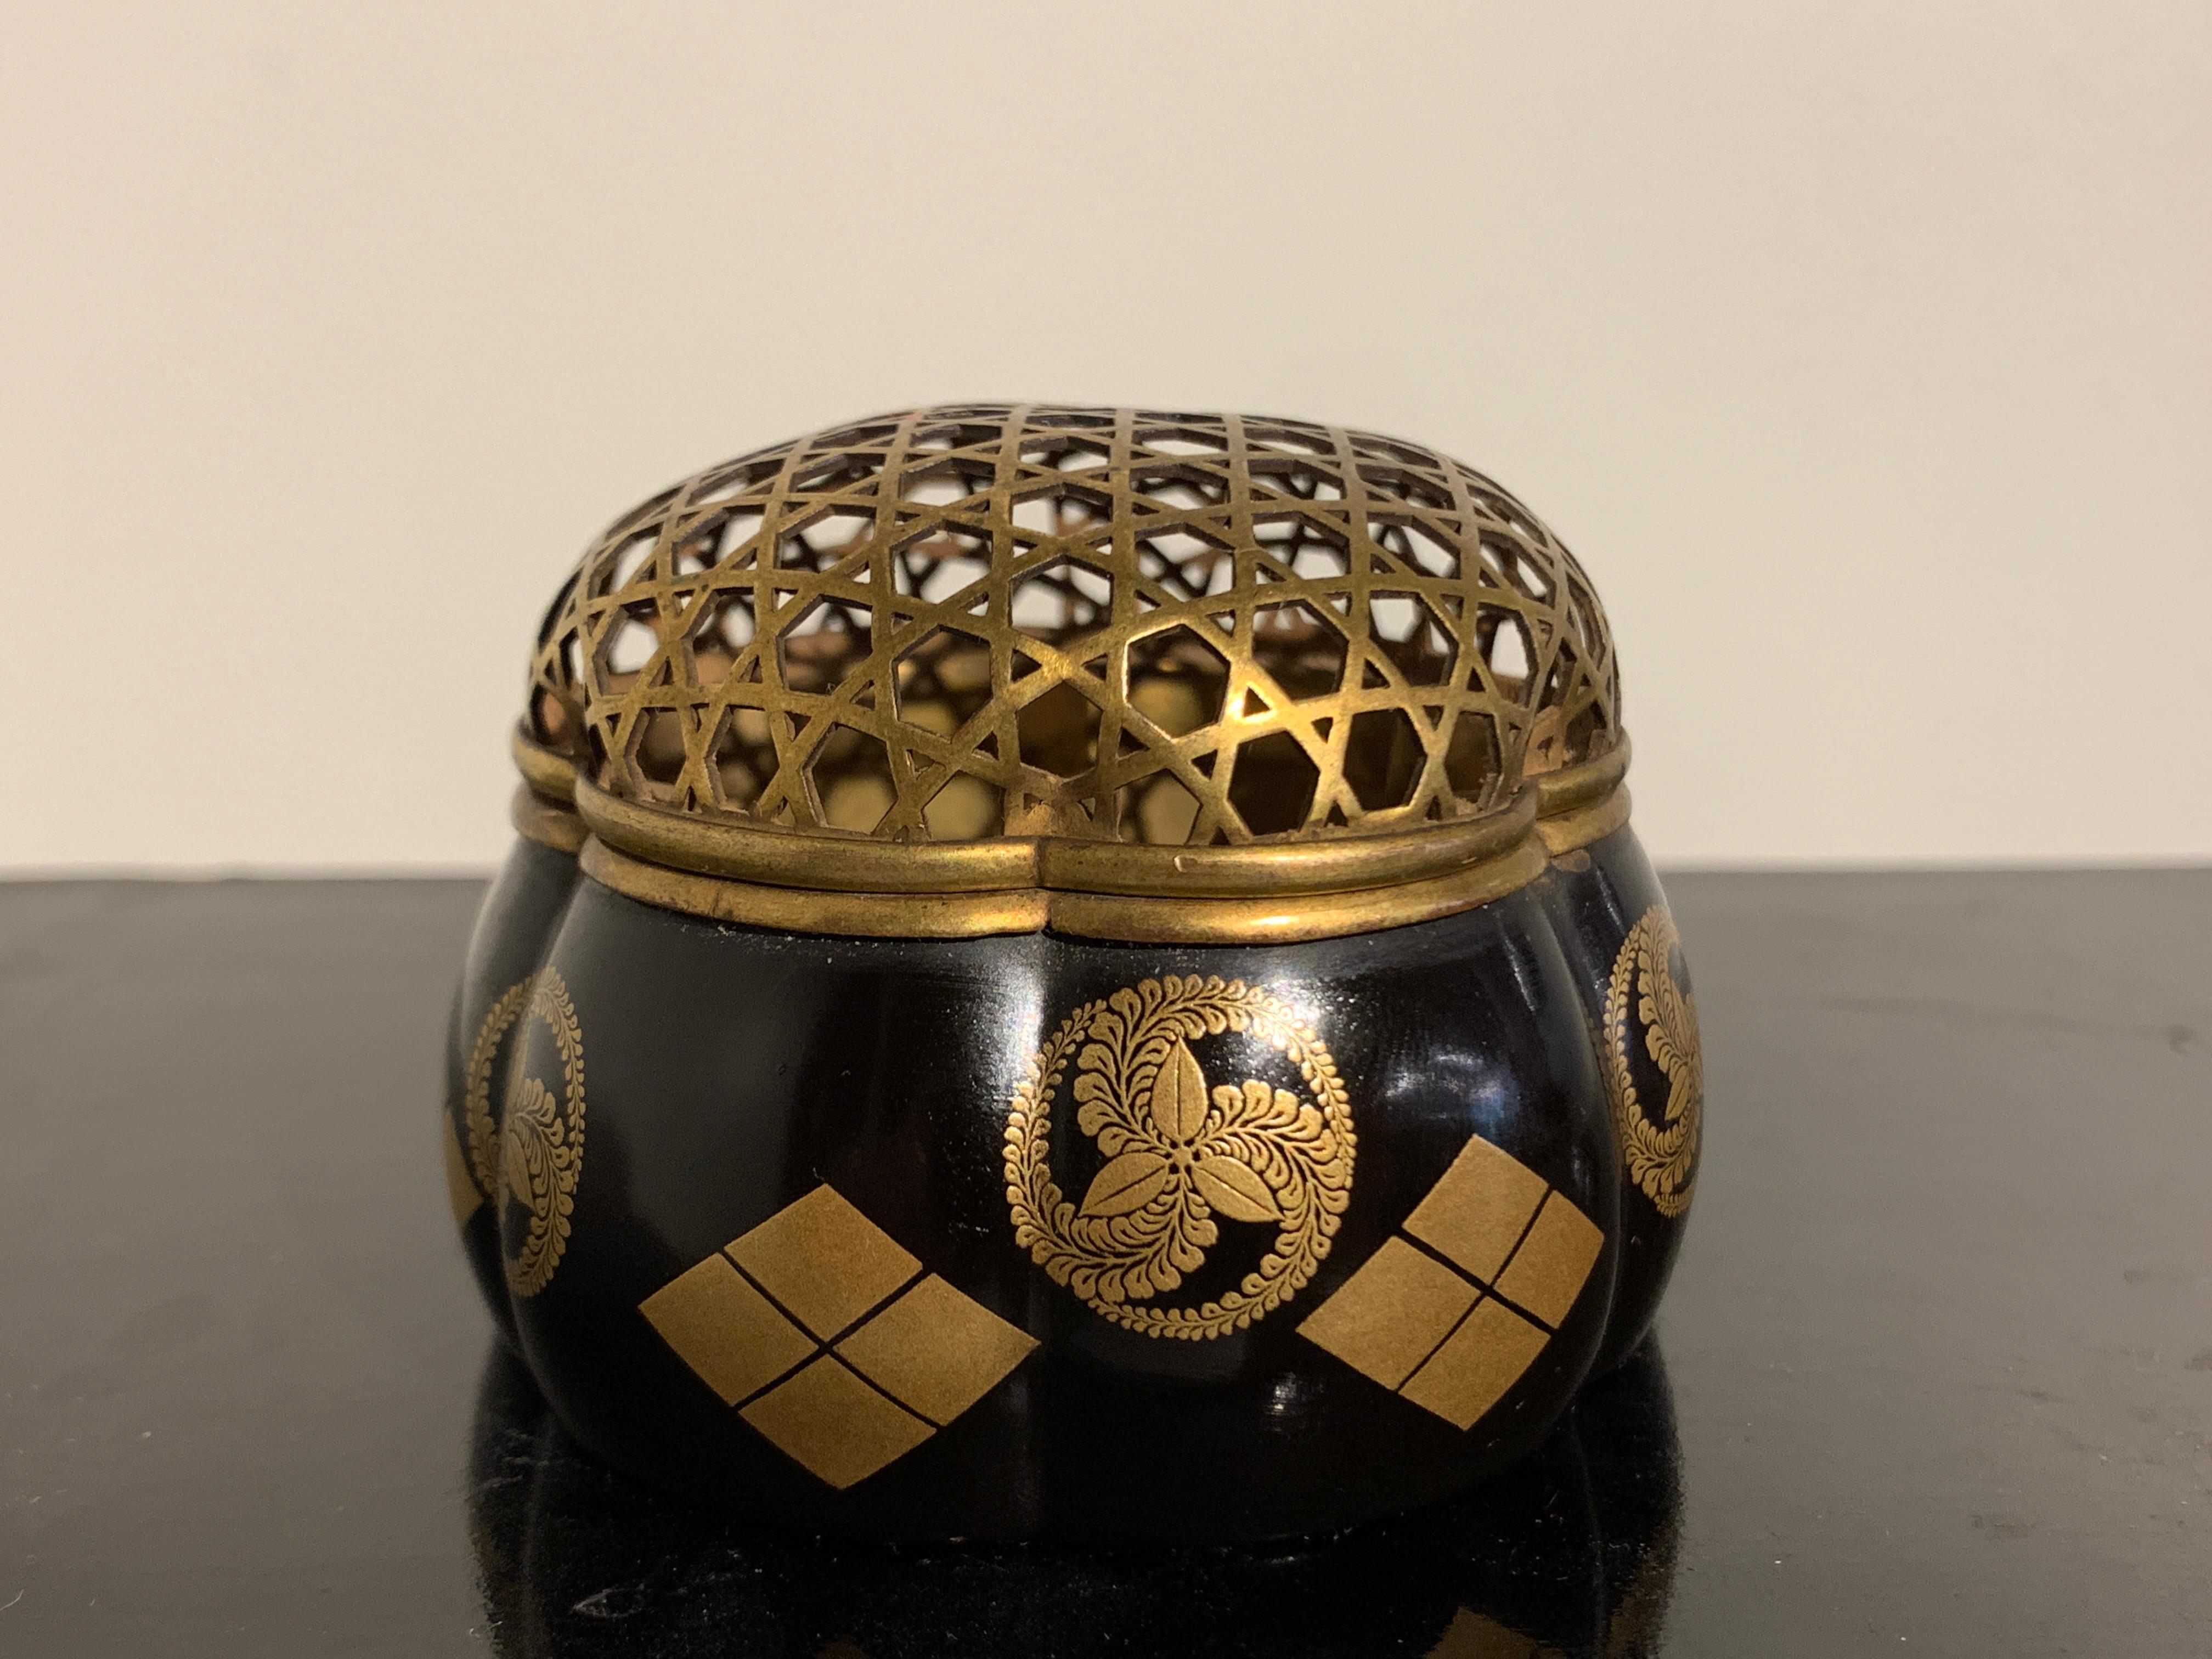 An exceptional Japanese black lacquer lobed incense burner, akoda koro, decorated with mon, Edo Period, 18th century, Japan.

The small censer of lobed melon form, called an akoda koro and decorated in a minimalistic fashion, with two graphic mon